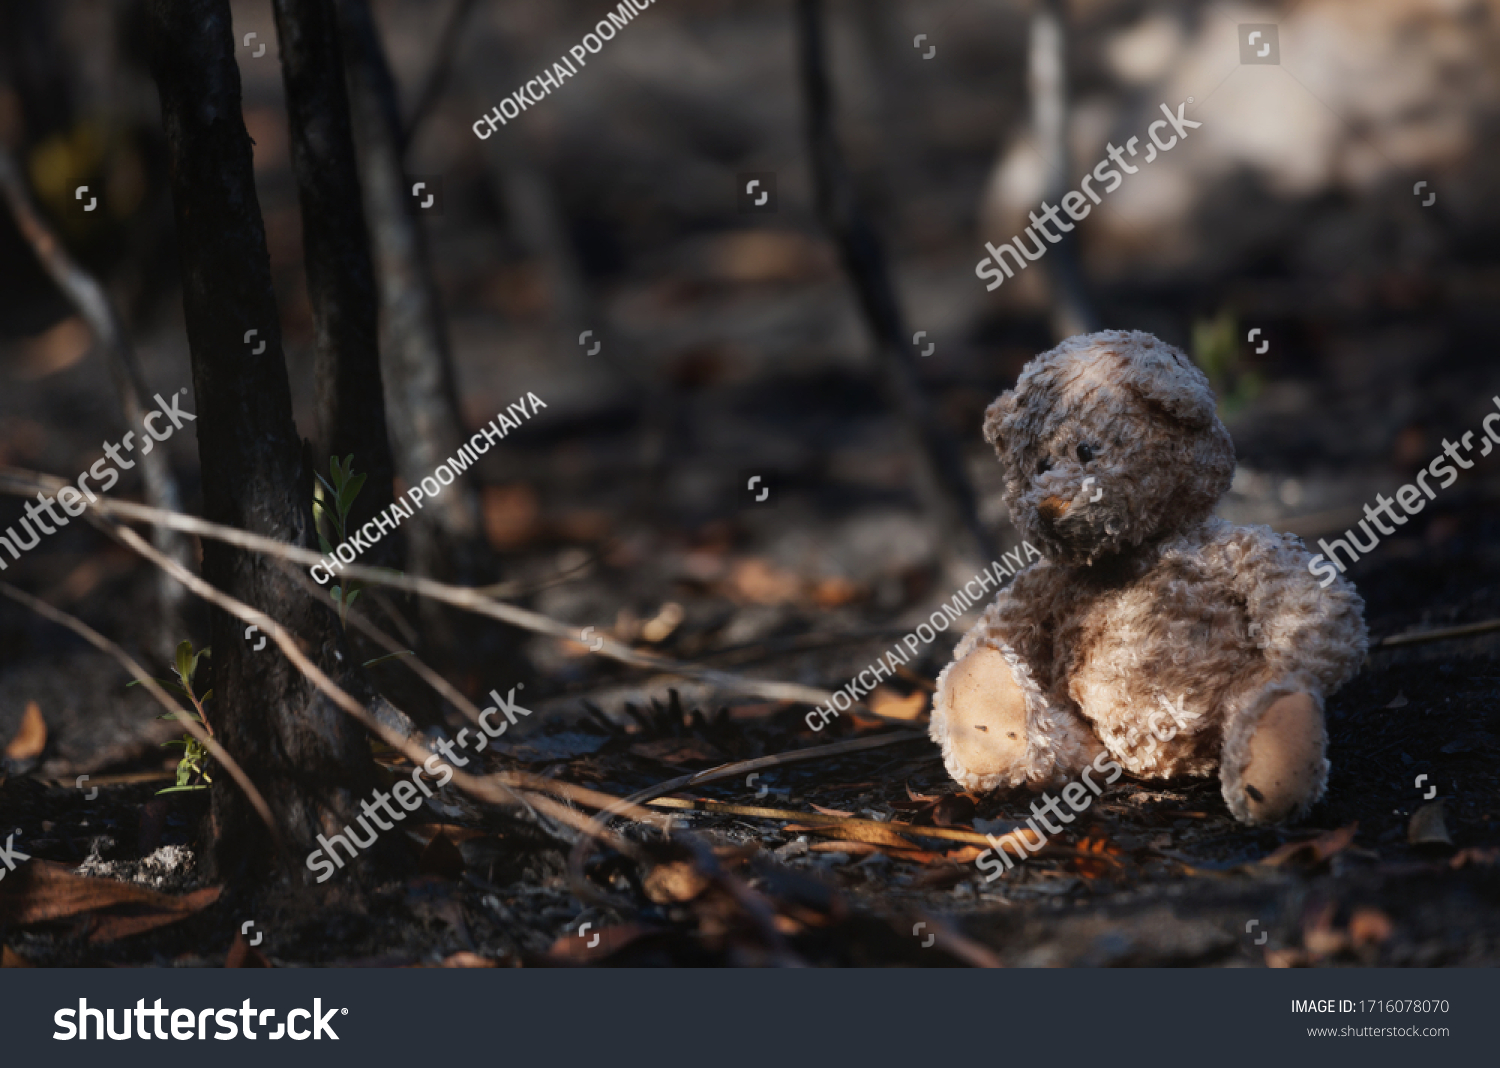 Lonely teddy bear in the  burnt forest.Global warming/Ecology concept background.  #1716078070